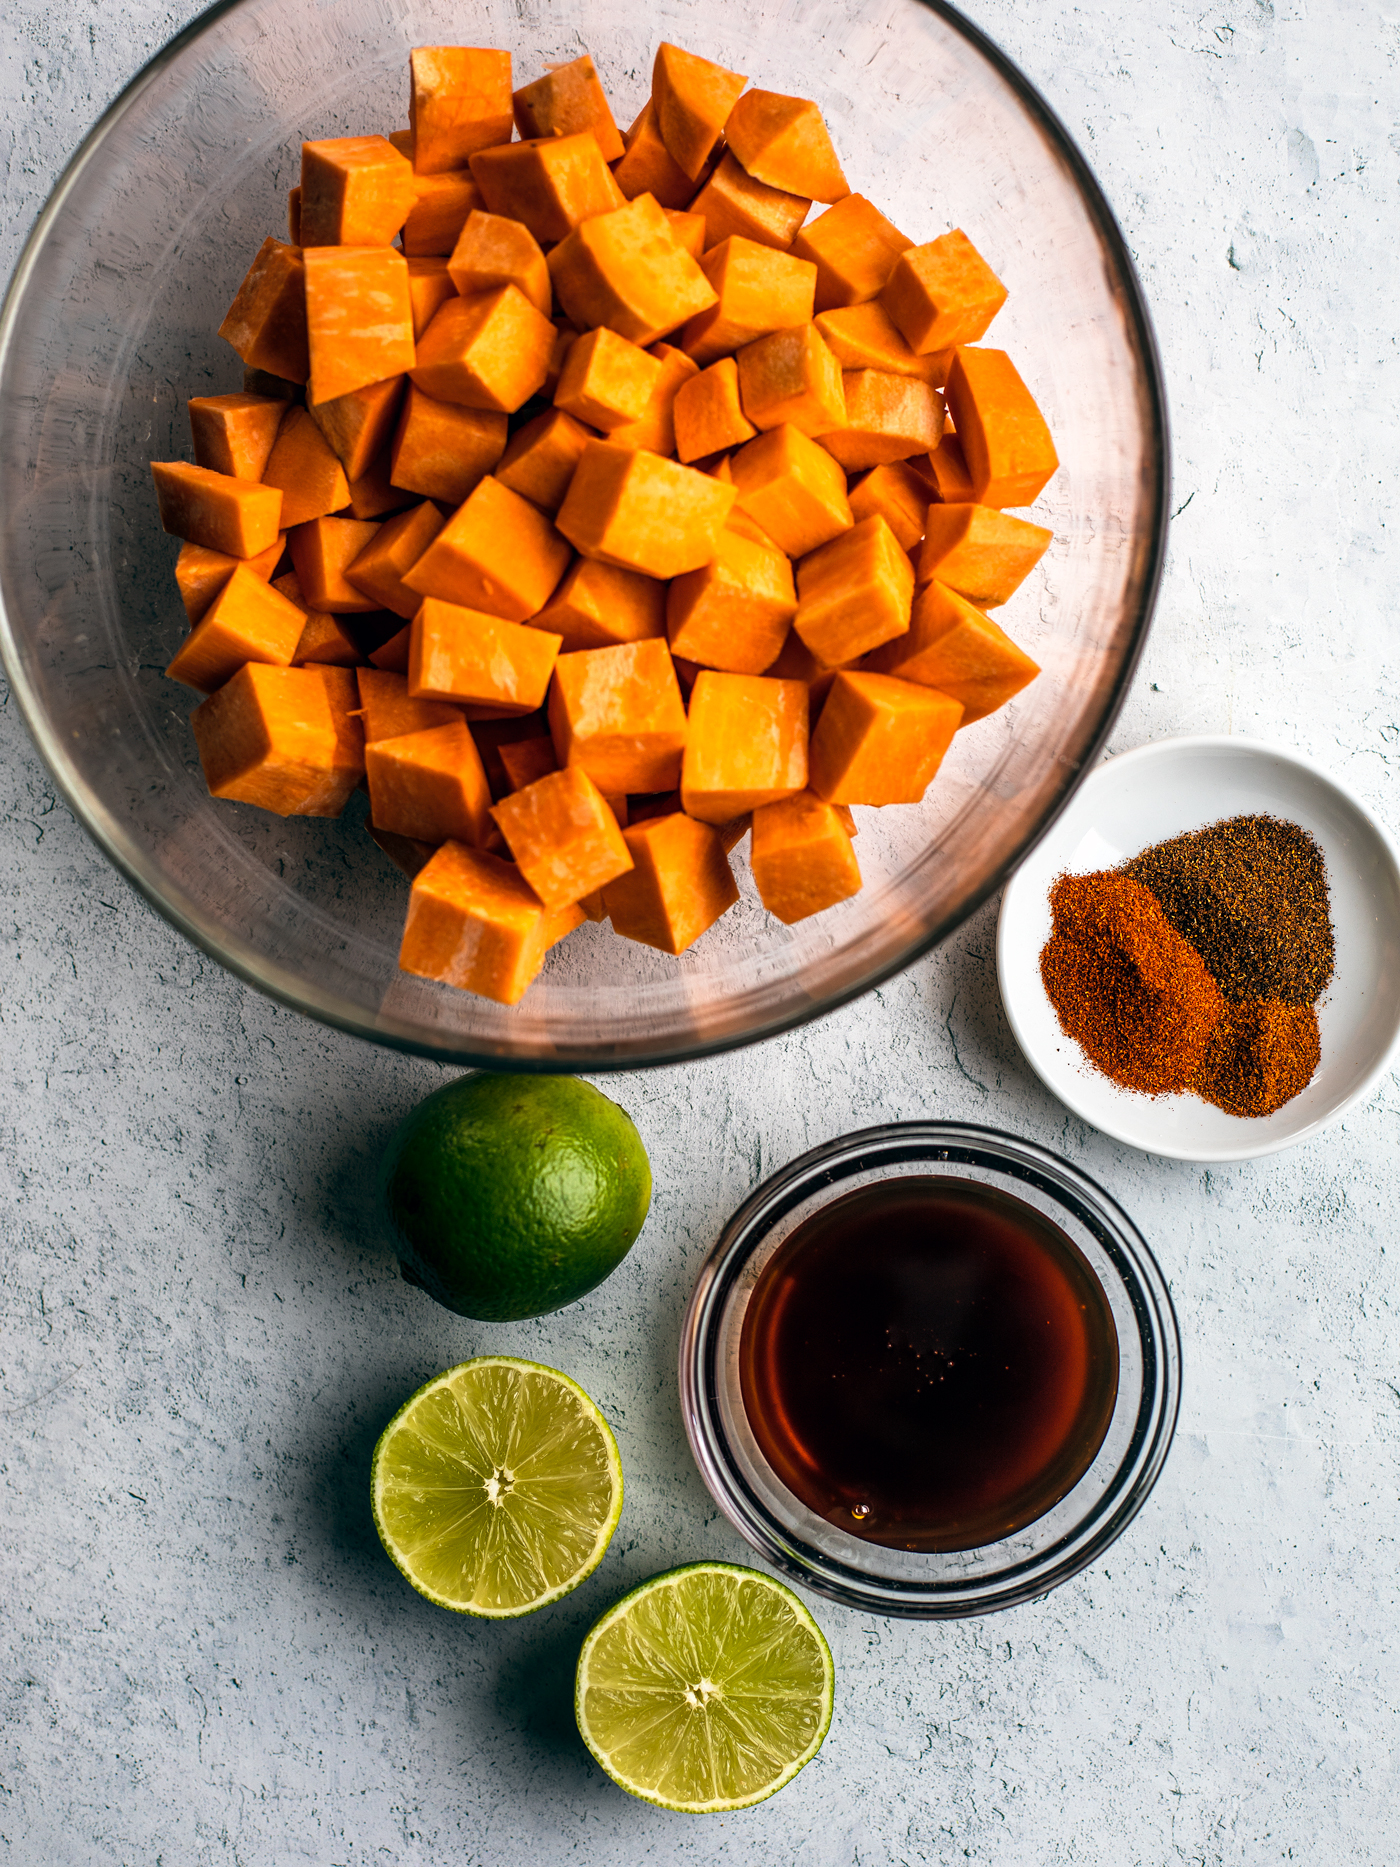 Bowl of cubed sweet potatoes, bowl of honey, pinch bowl of spice blend, and limes.